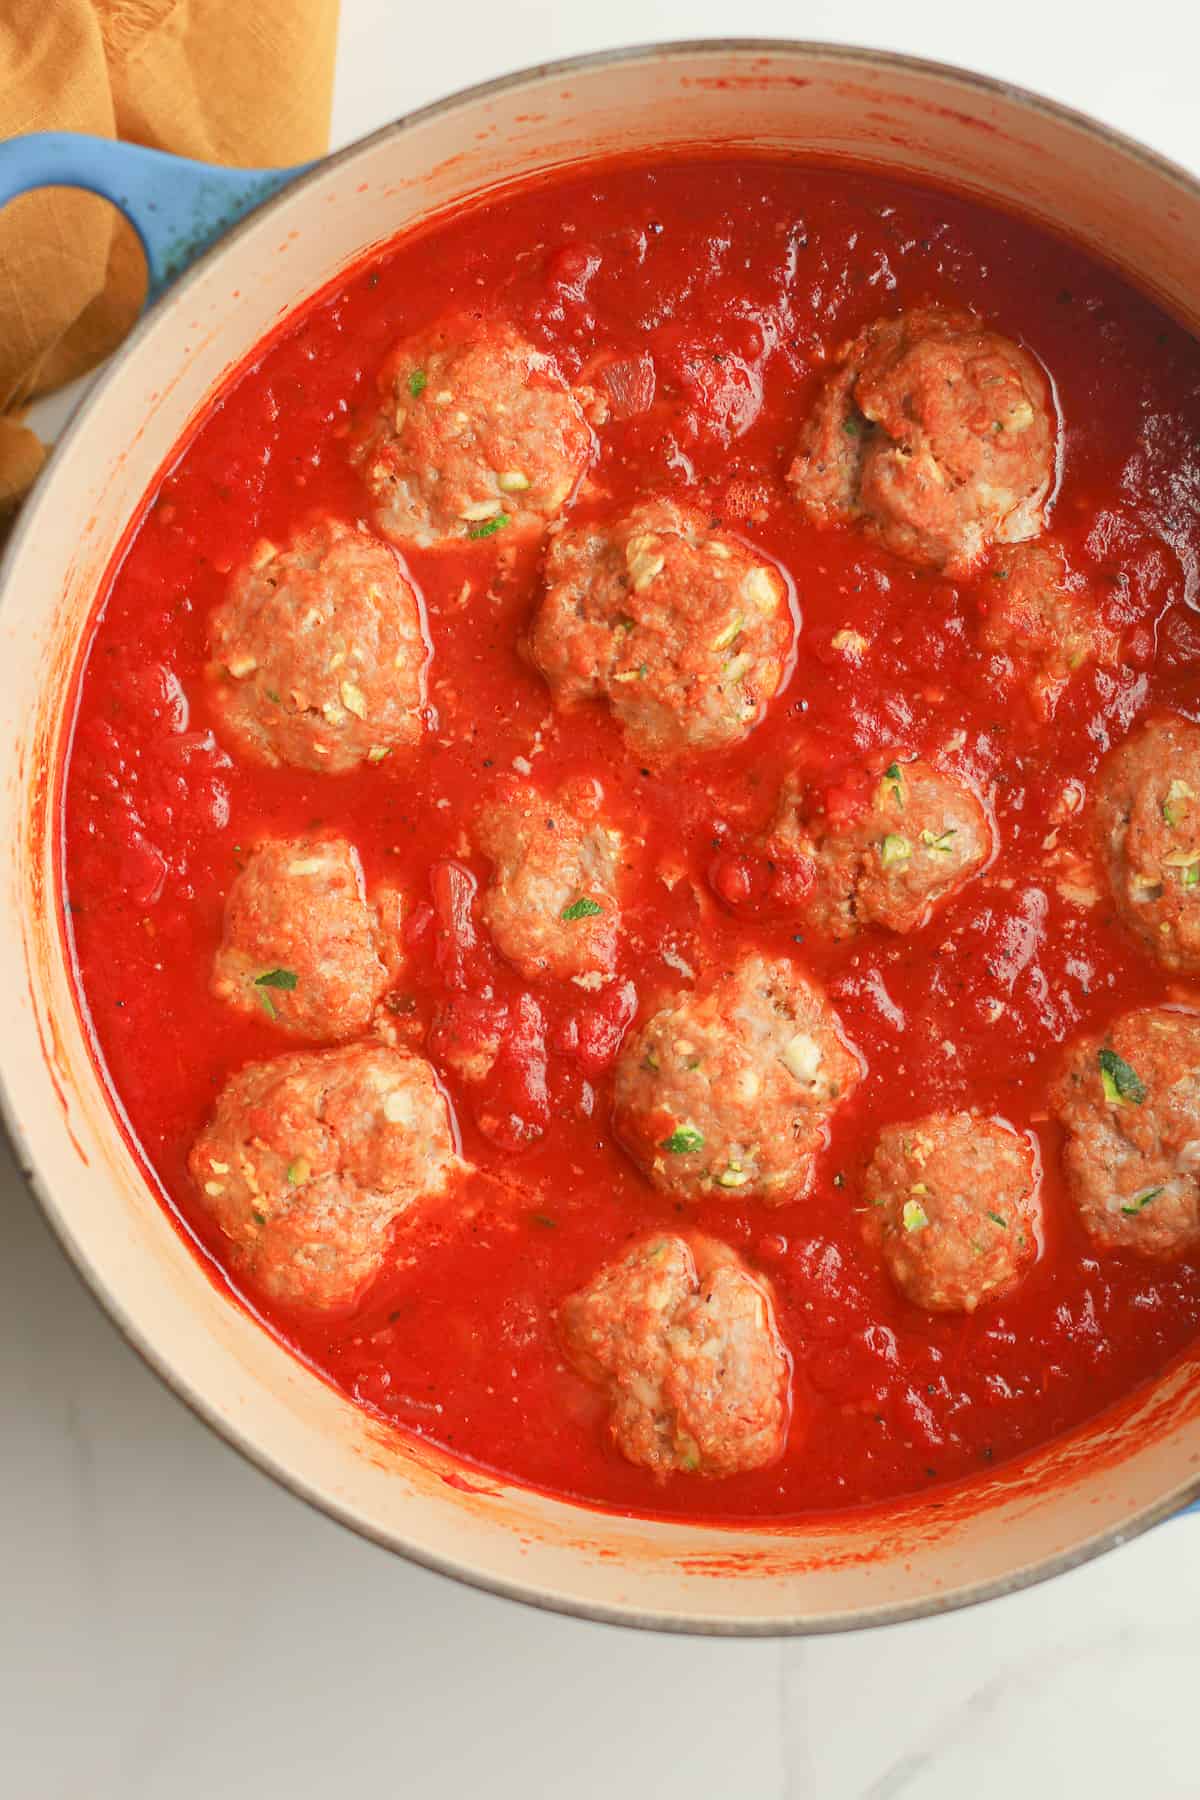 A stockpot of meatballs with sauce.